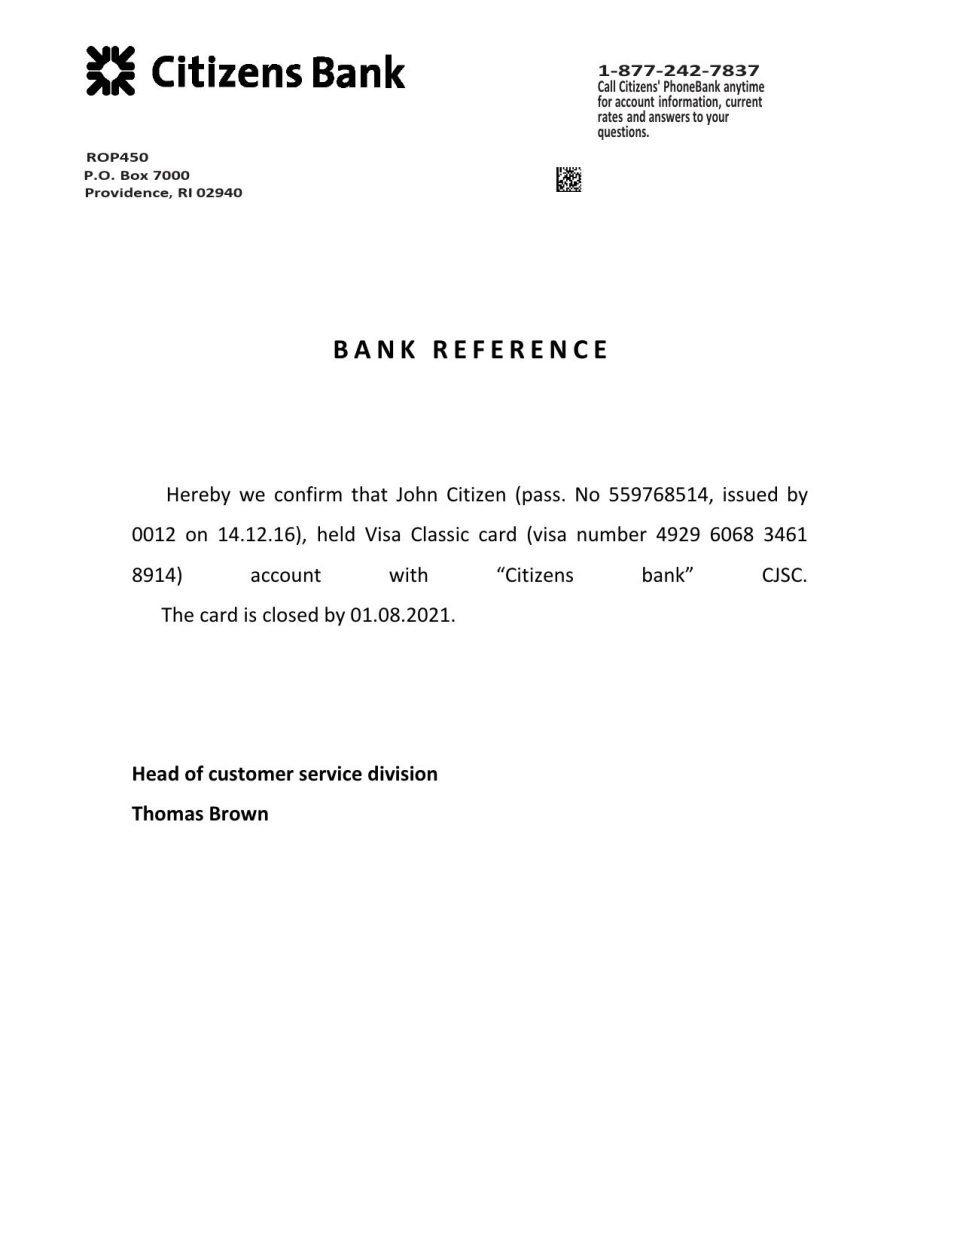 Download USA Citizens Bank Reference Letter Templates | Editable Word